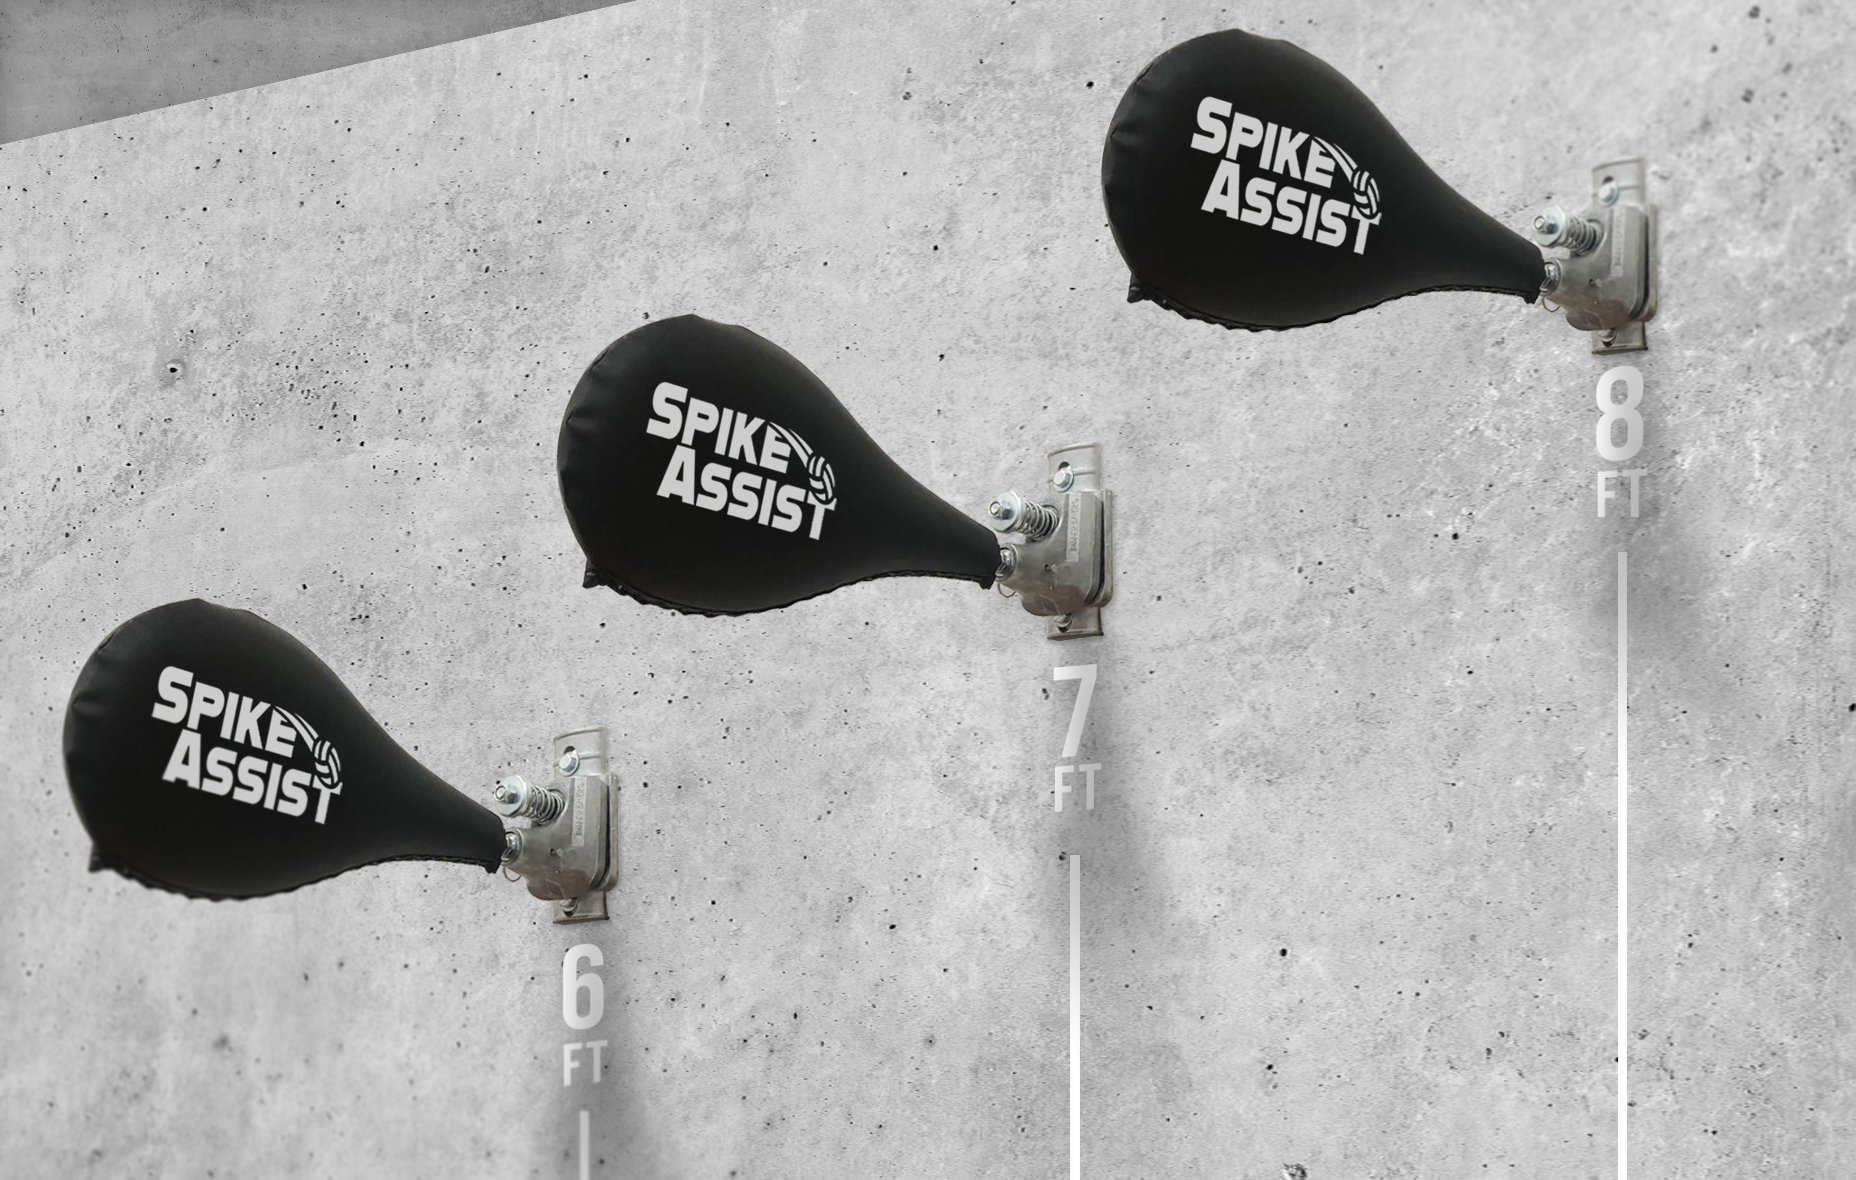 SpikeAssist mounted on a gym wall